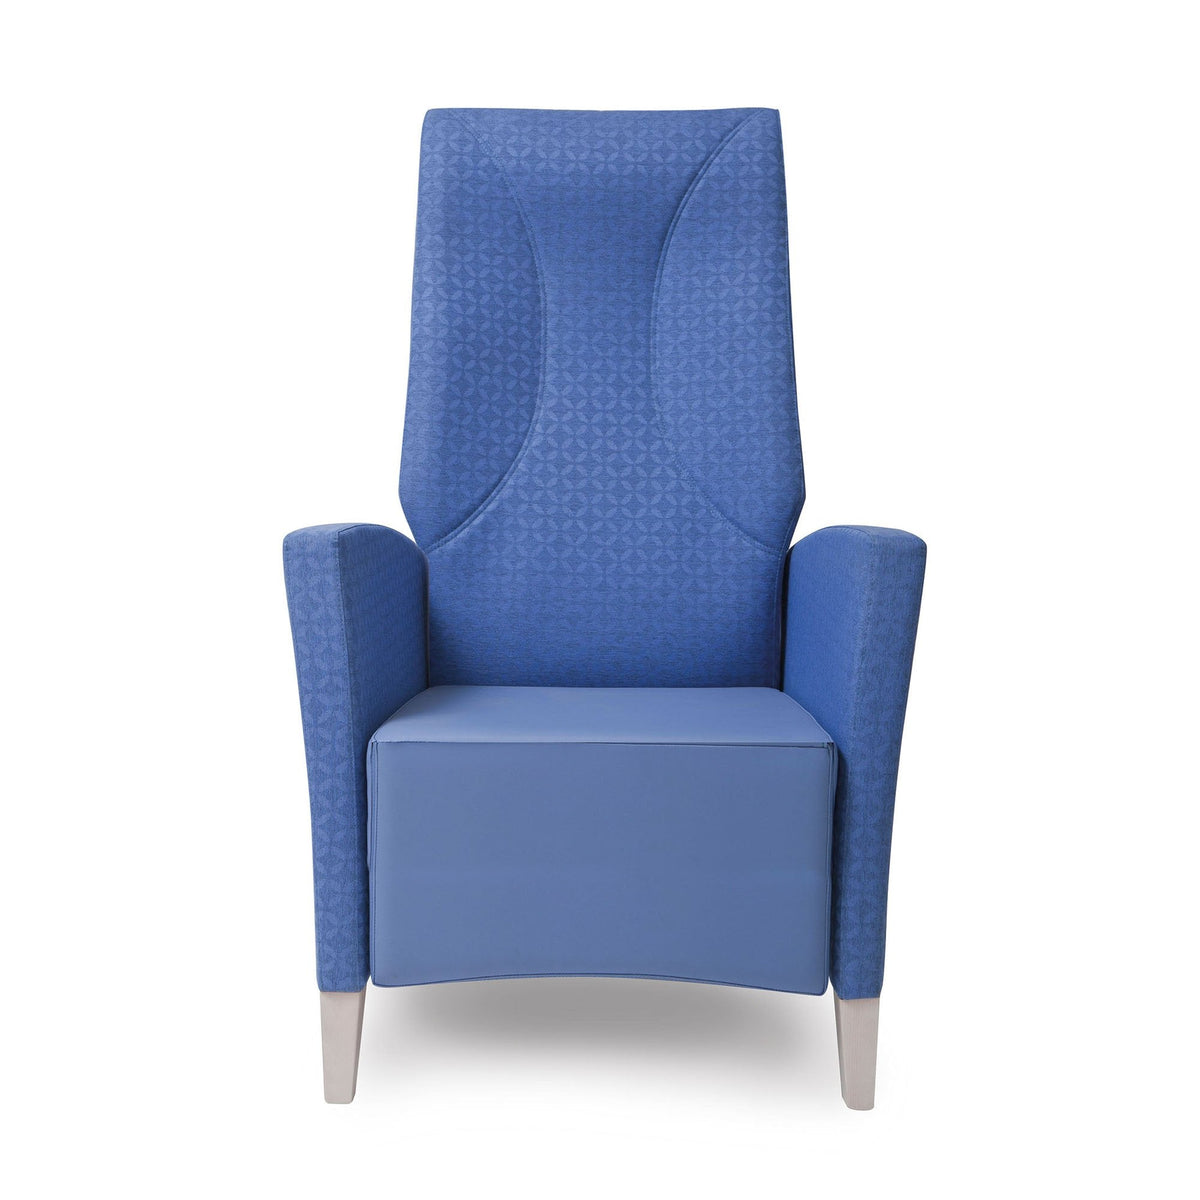 Fandango 79-62/3 Lounge Chair-Piaval-Contract Furniture Store